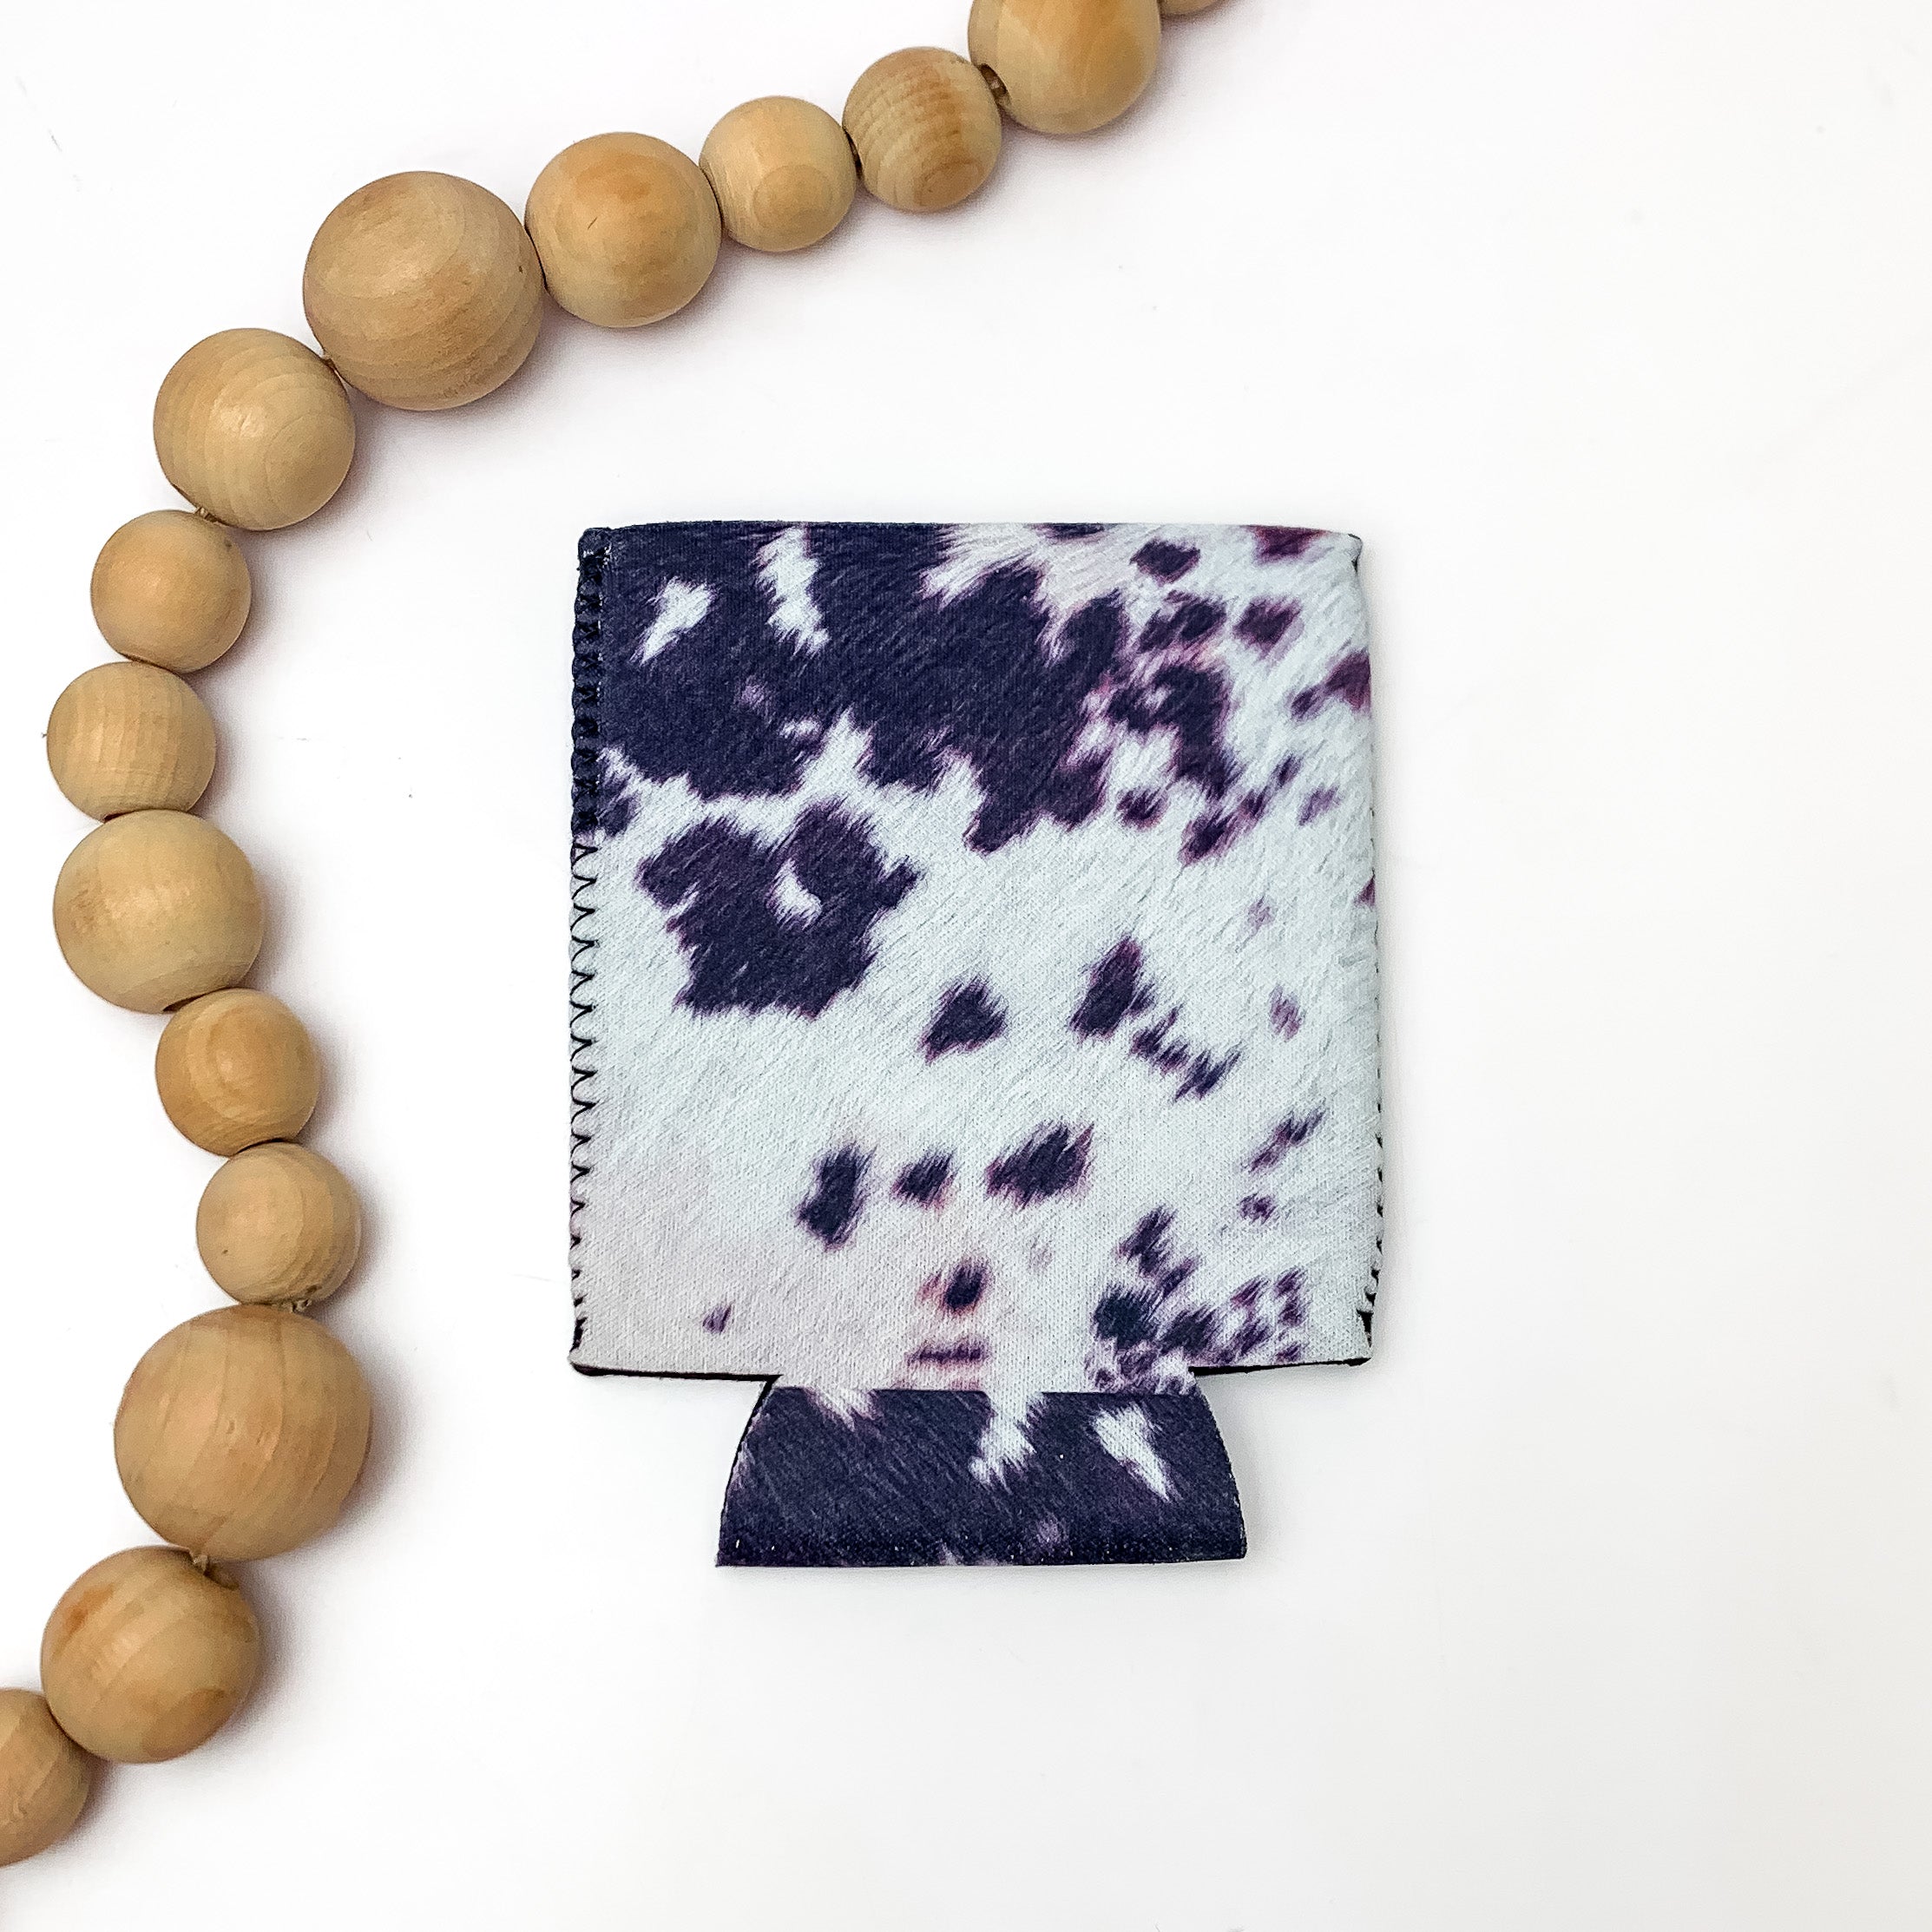 Black and White Cow Print Koozie. Pictured on a white background with wood beads to the left of the koozie for decoration.